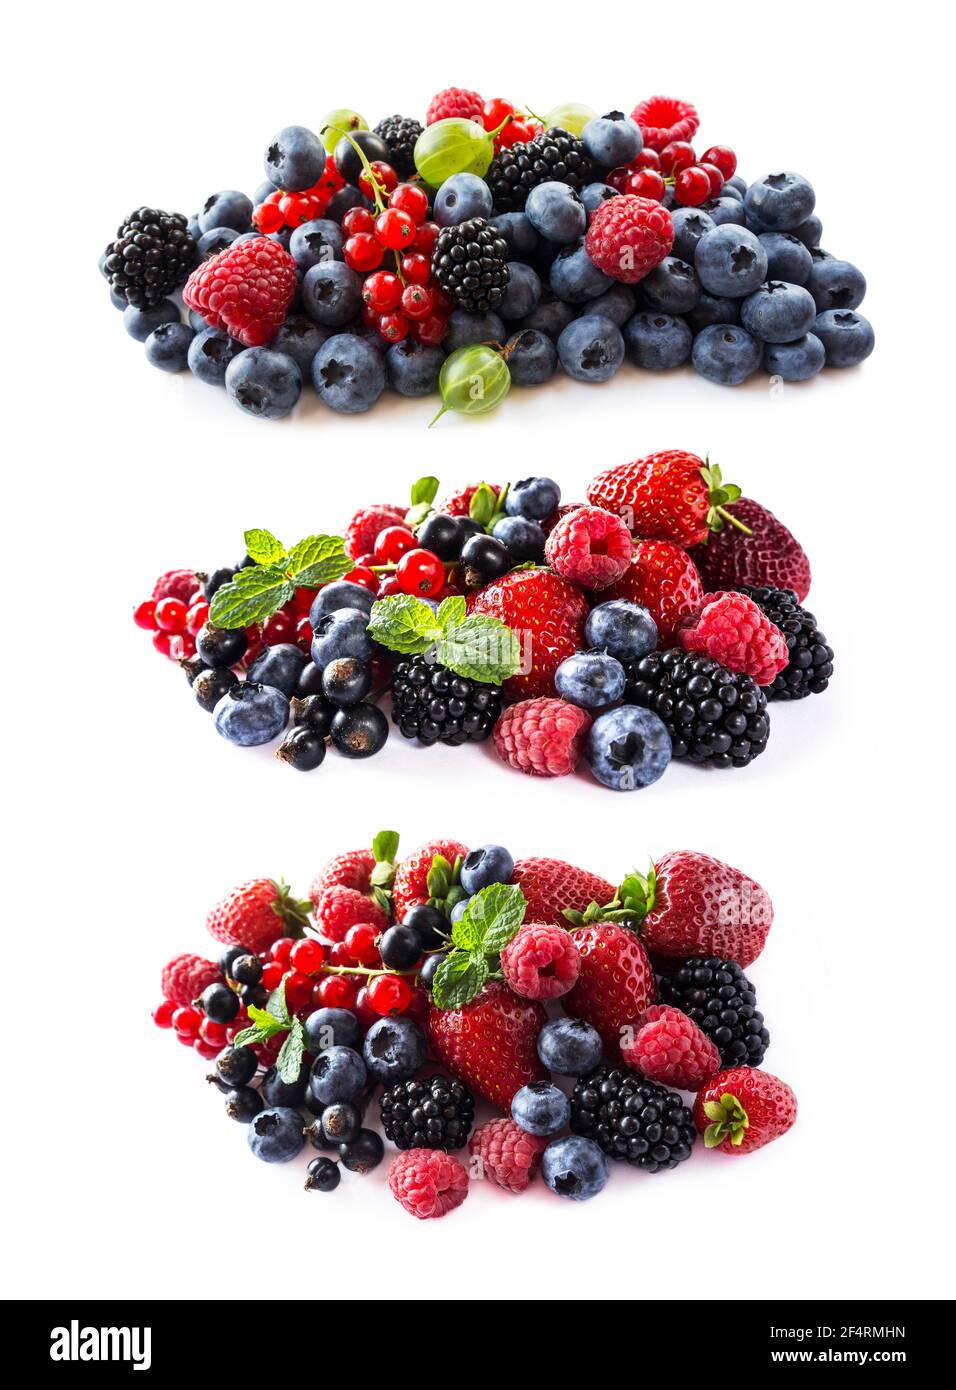 Berries isolated on white background. Ripe blueberries, blackberries, blackcurrants, raspberries, gooseberries, strawberries and red currants. Mix fru Stock Photo